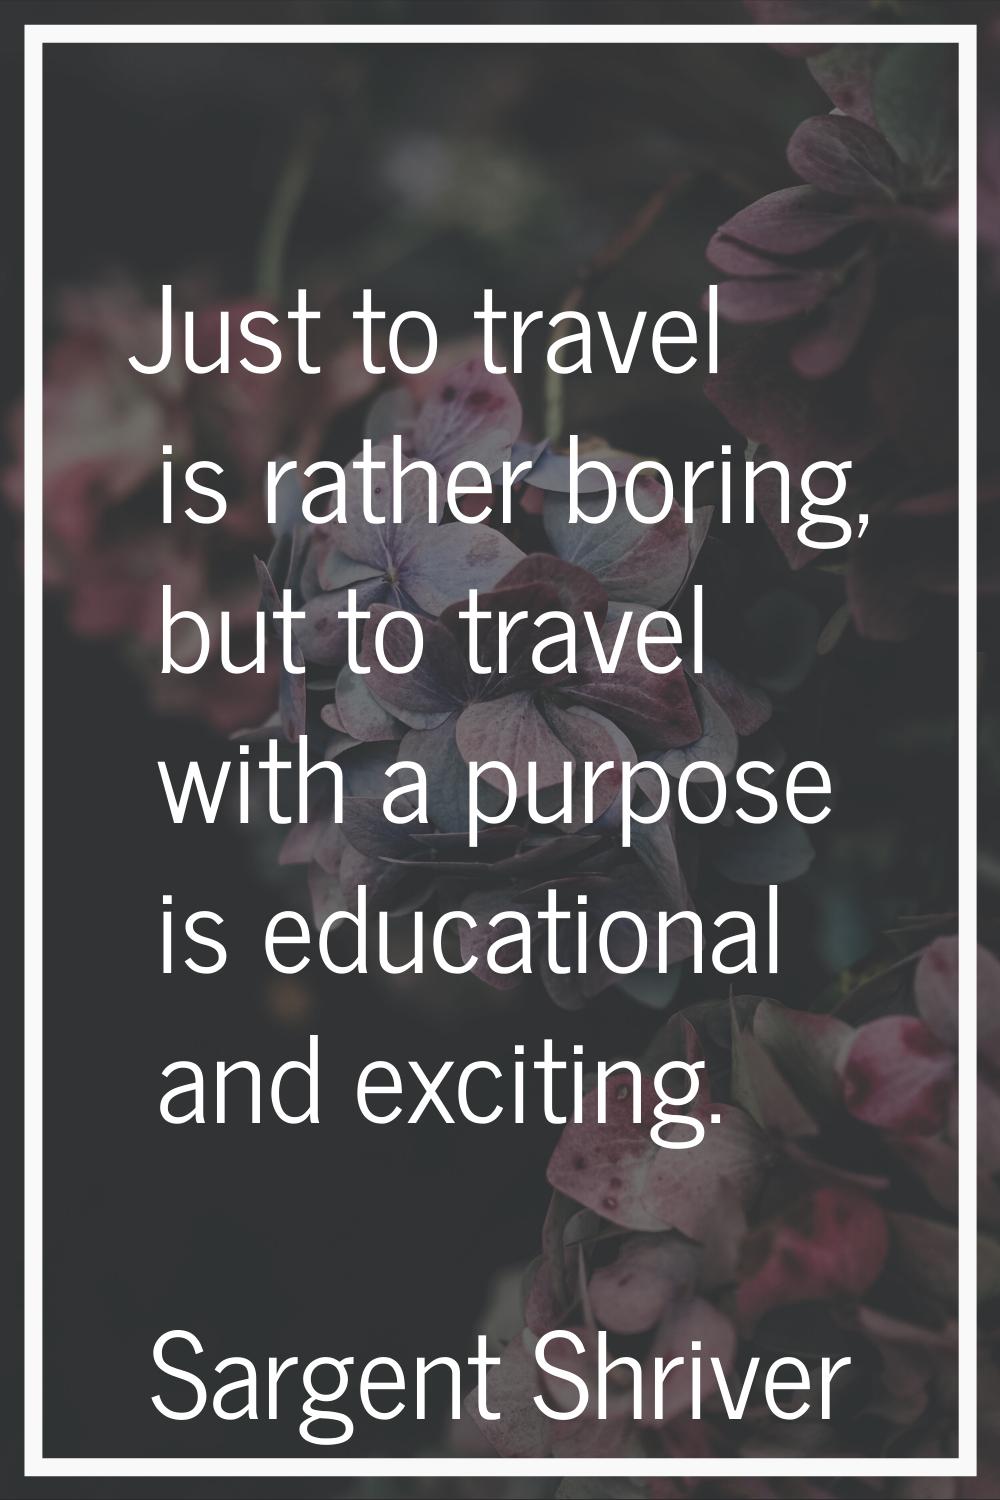 Just to travel is rather boring, but to travel with a purpose is educational and exciting.